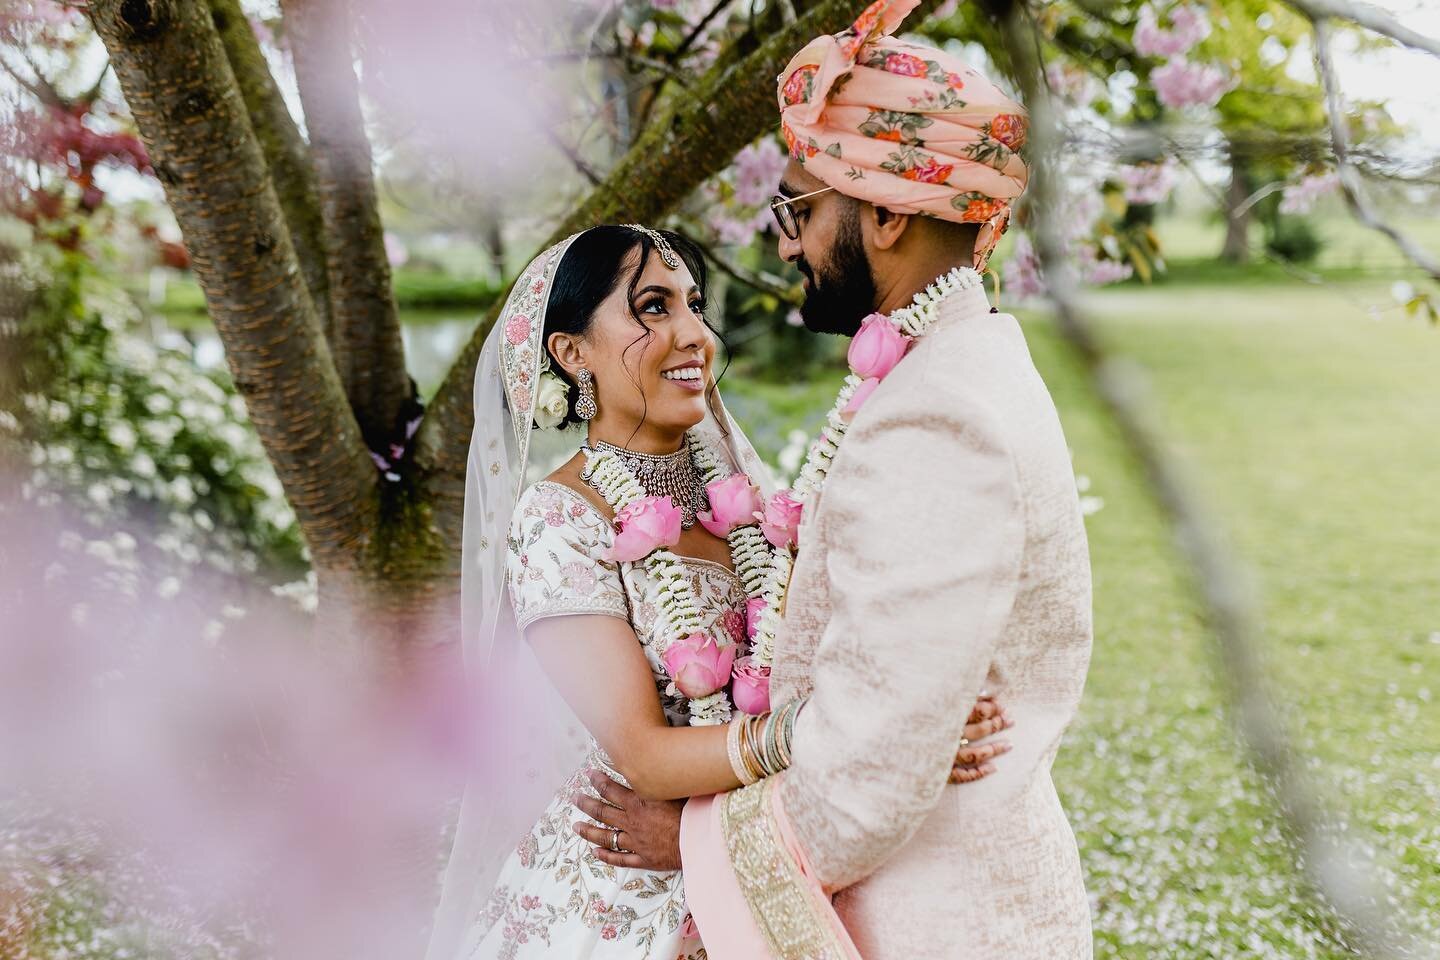 I had the absolute pleasure of capturing Jayna and Sunny's fusion wedding at Nailcote Hall in Coventry on Friday, and let me tell you, it was one for the books! The day was filled with so much excitement, love, and good vibes from start to finish. De